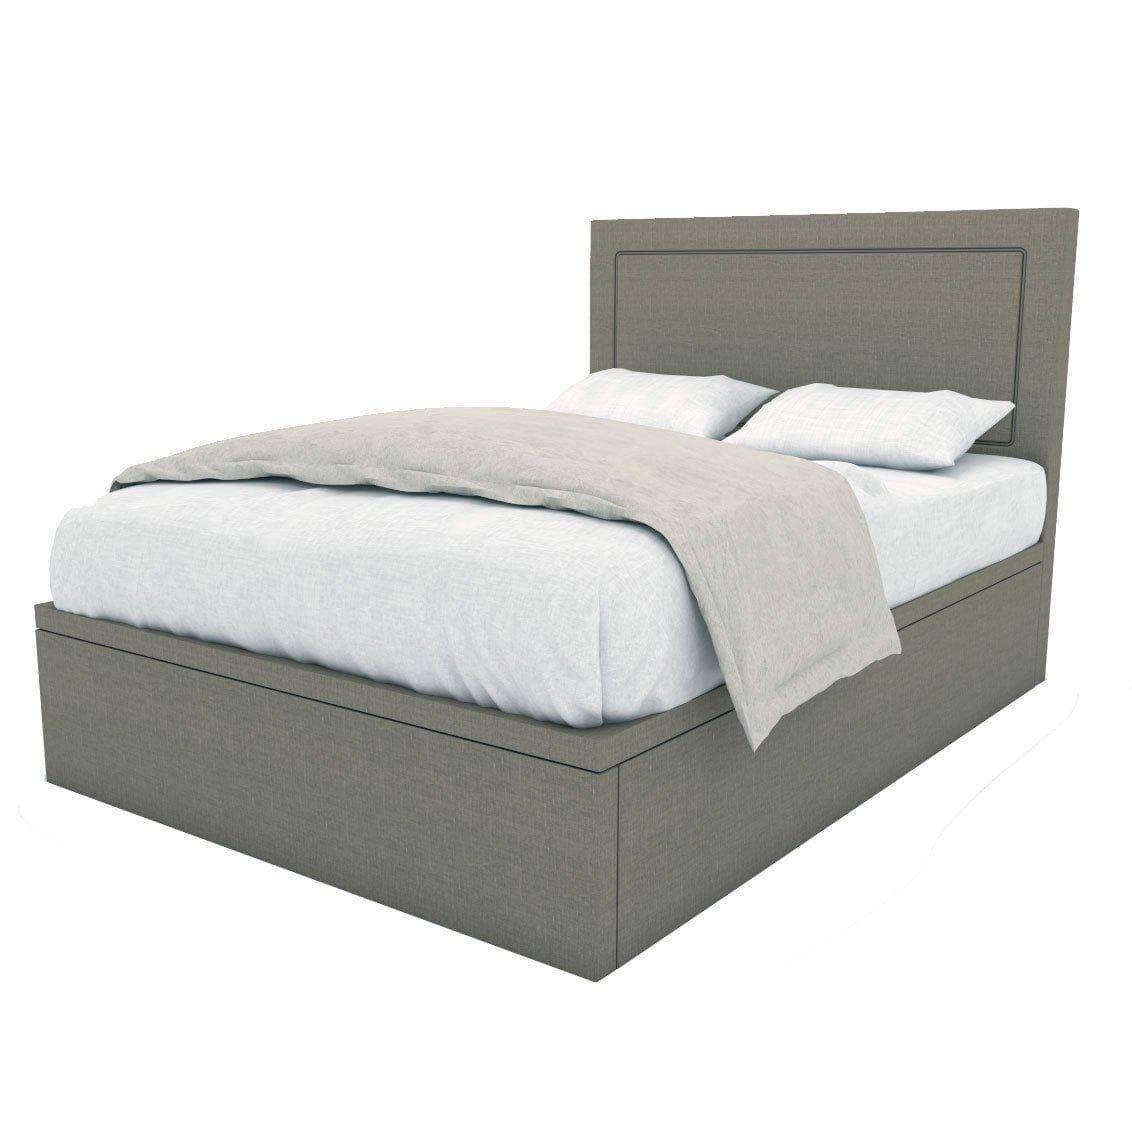 Garrice Grey Fabric Storage Bed Frame (Water Repellent) Singapore